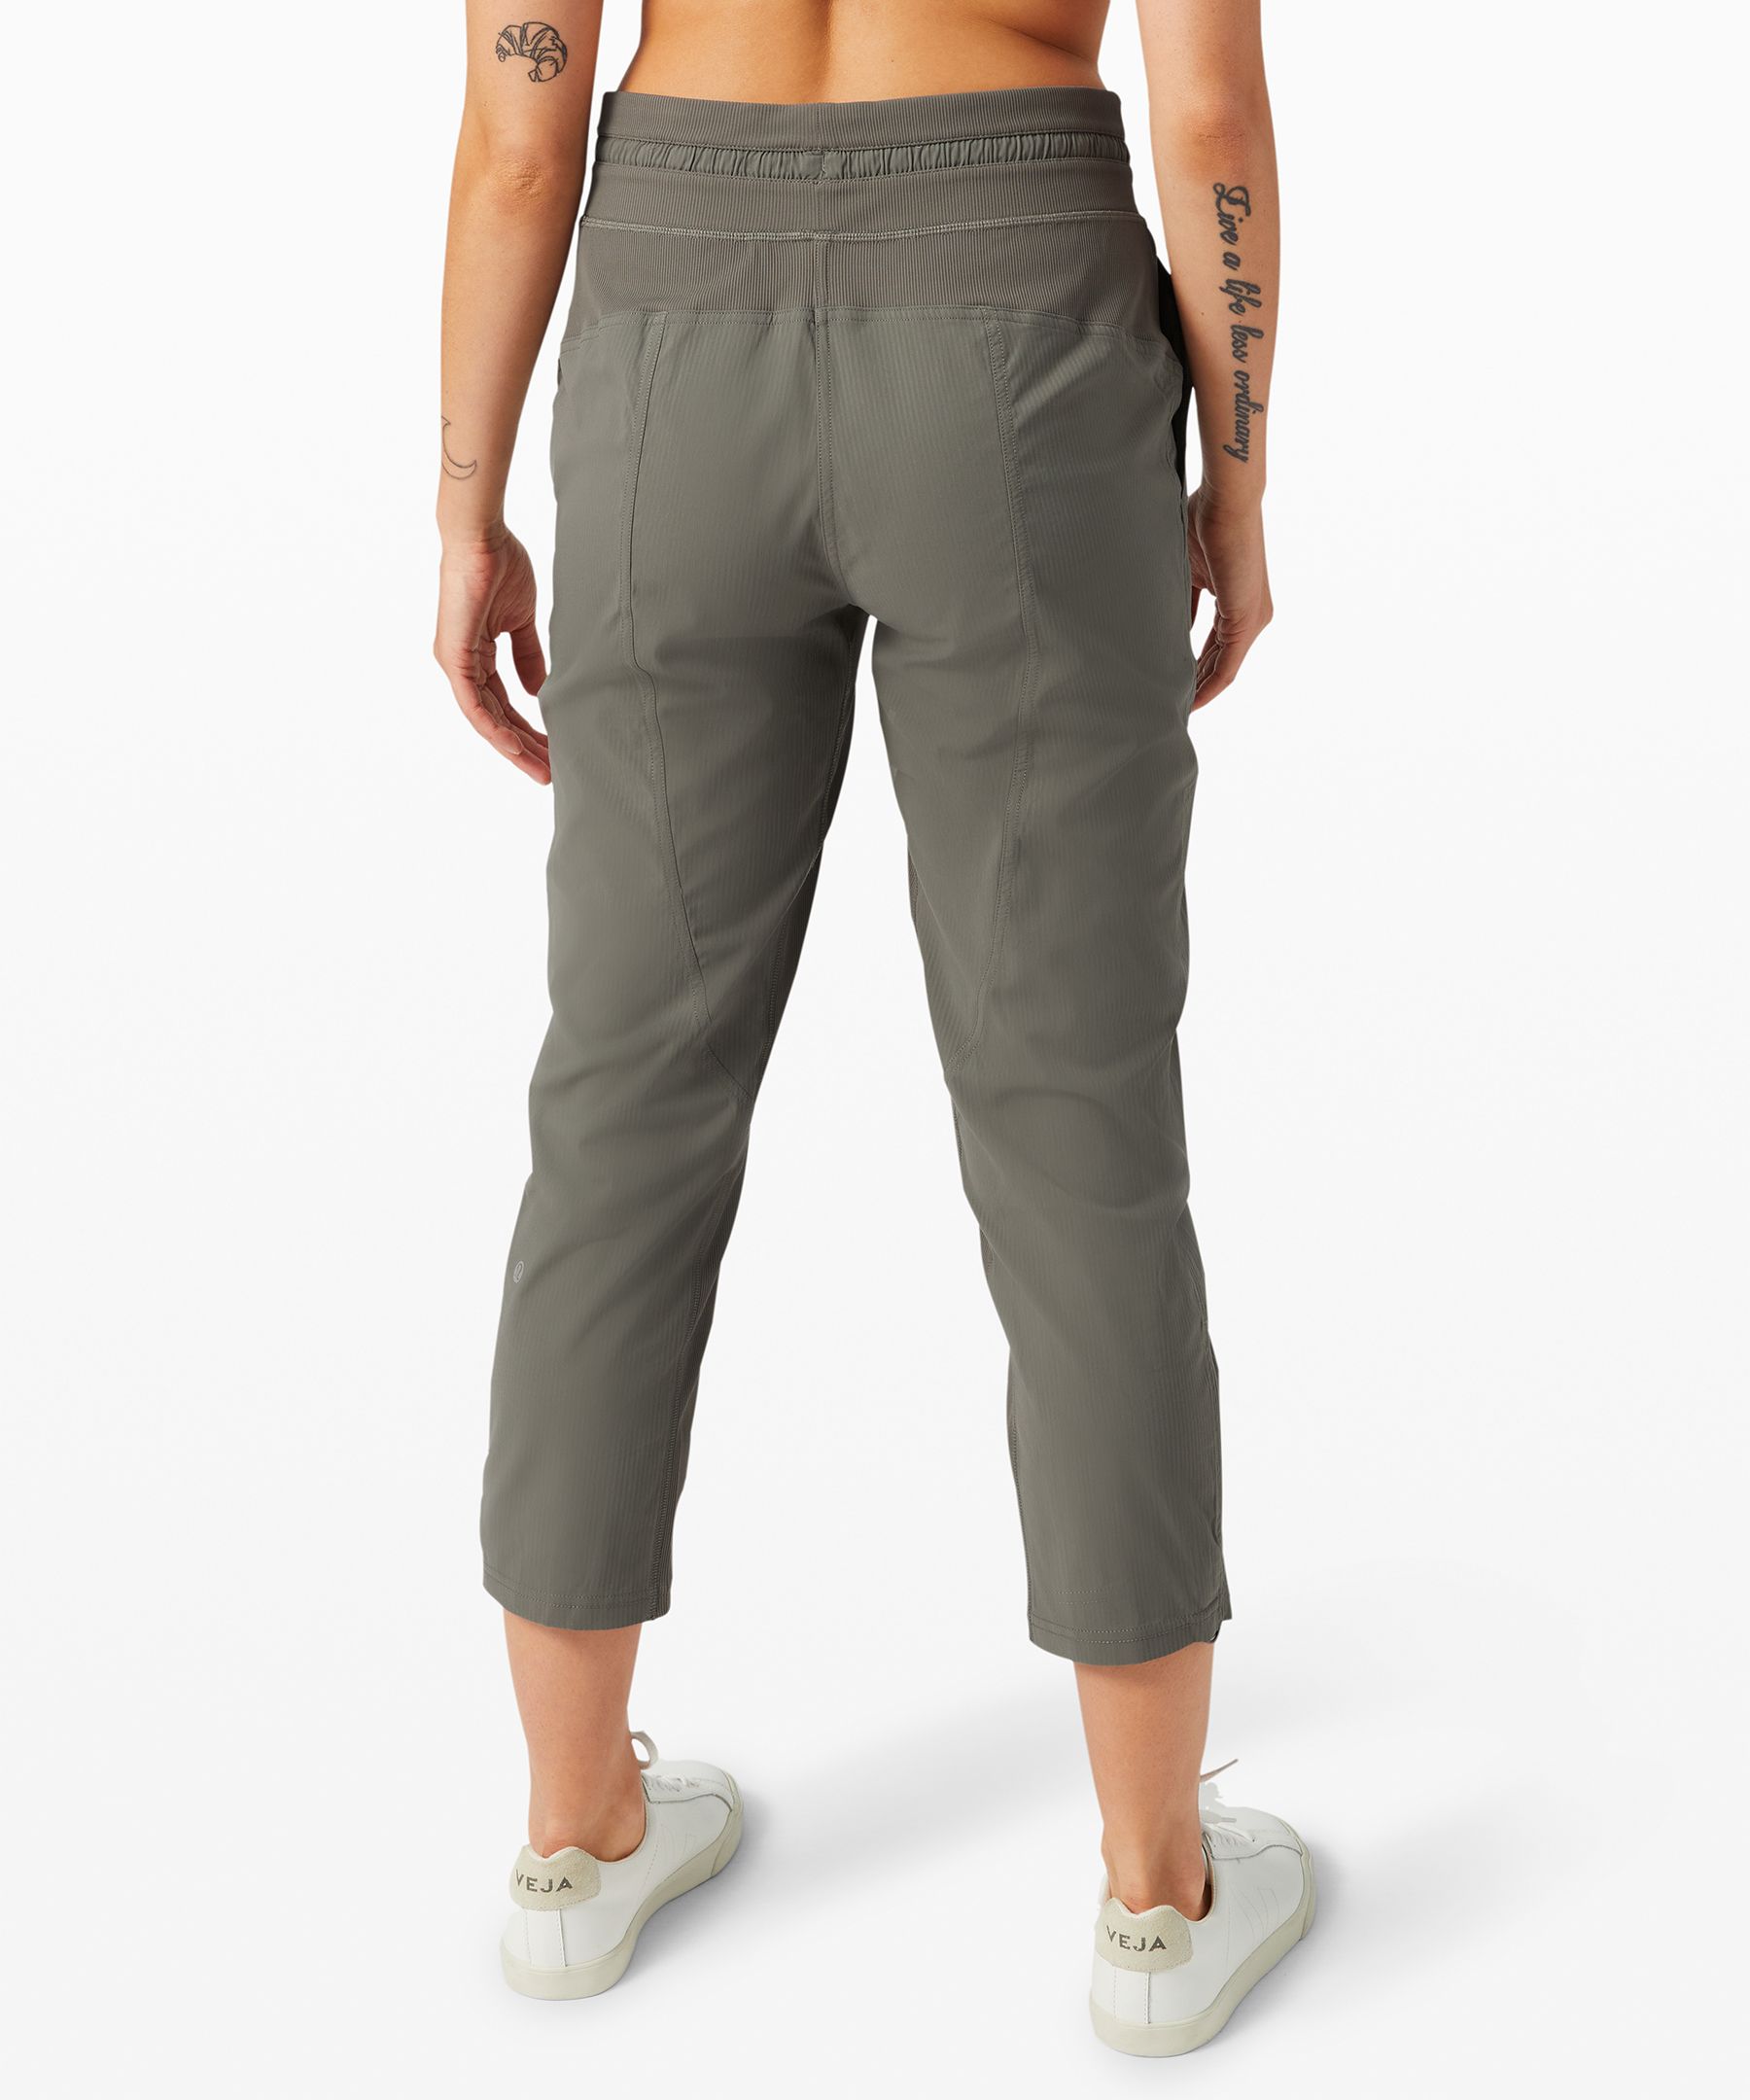 Lululemon Align High-rise Ruched Waist Pant 25th